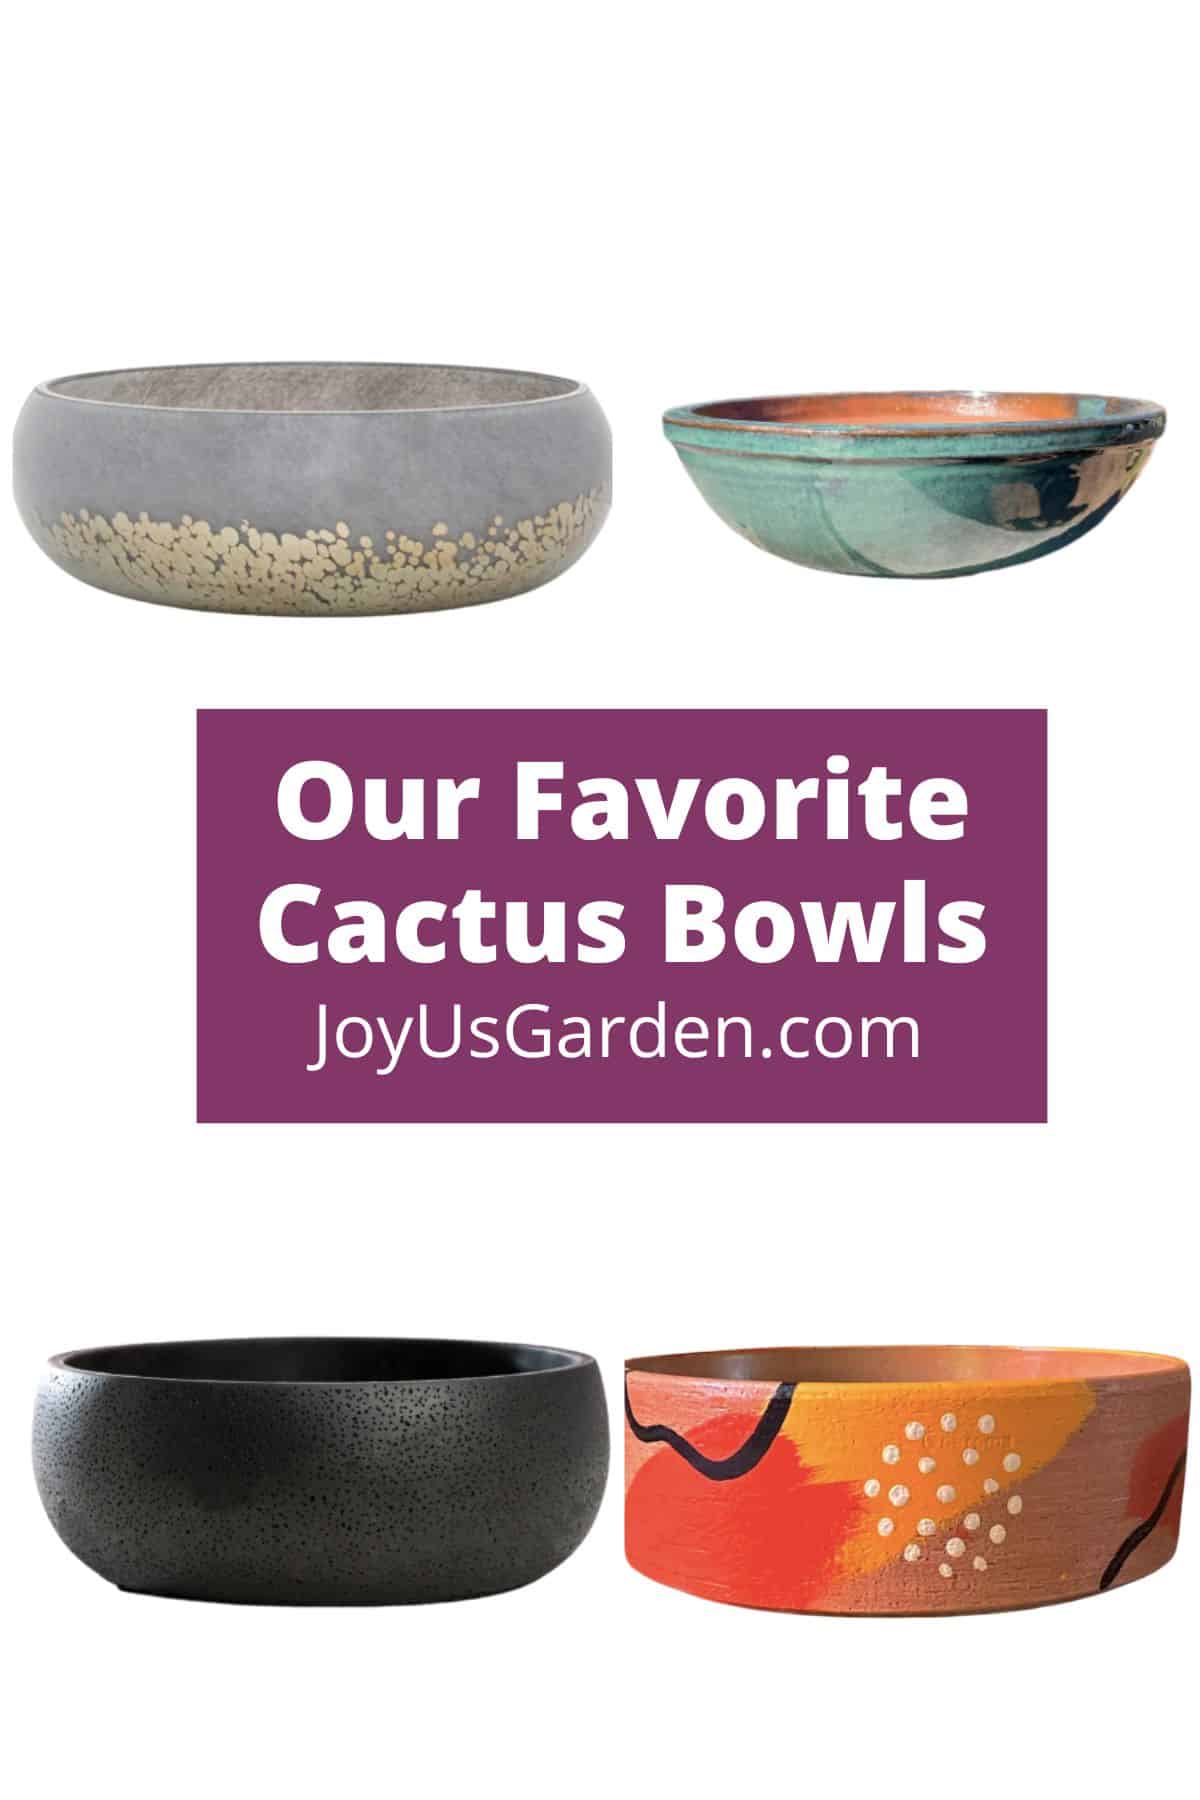 4 cactus bowls are shown in collage from etsy and the text reads our favorite cactus bowls joyusgarden.com